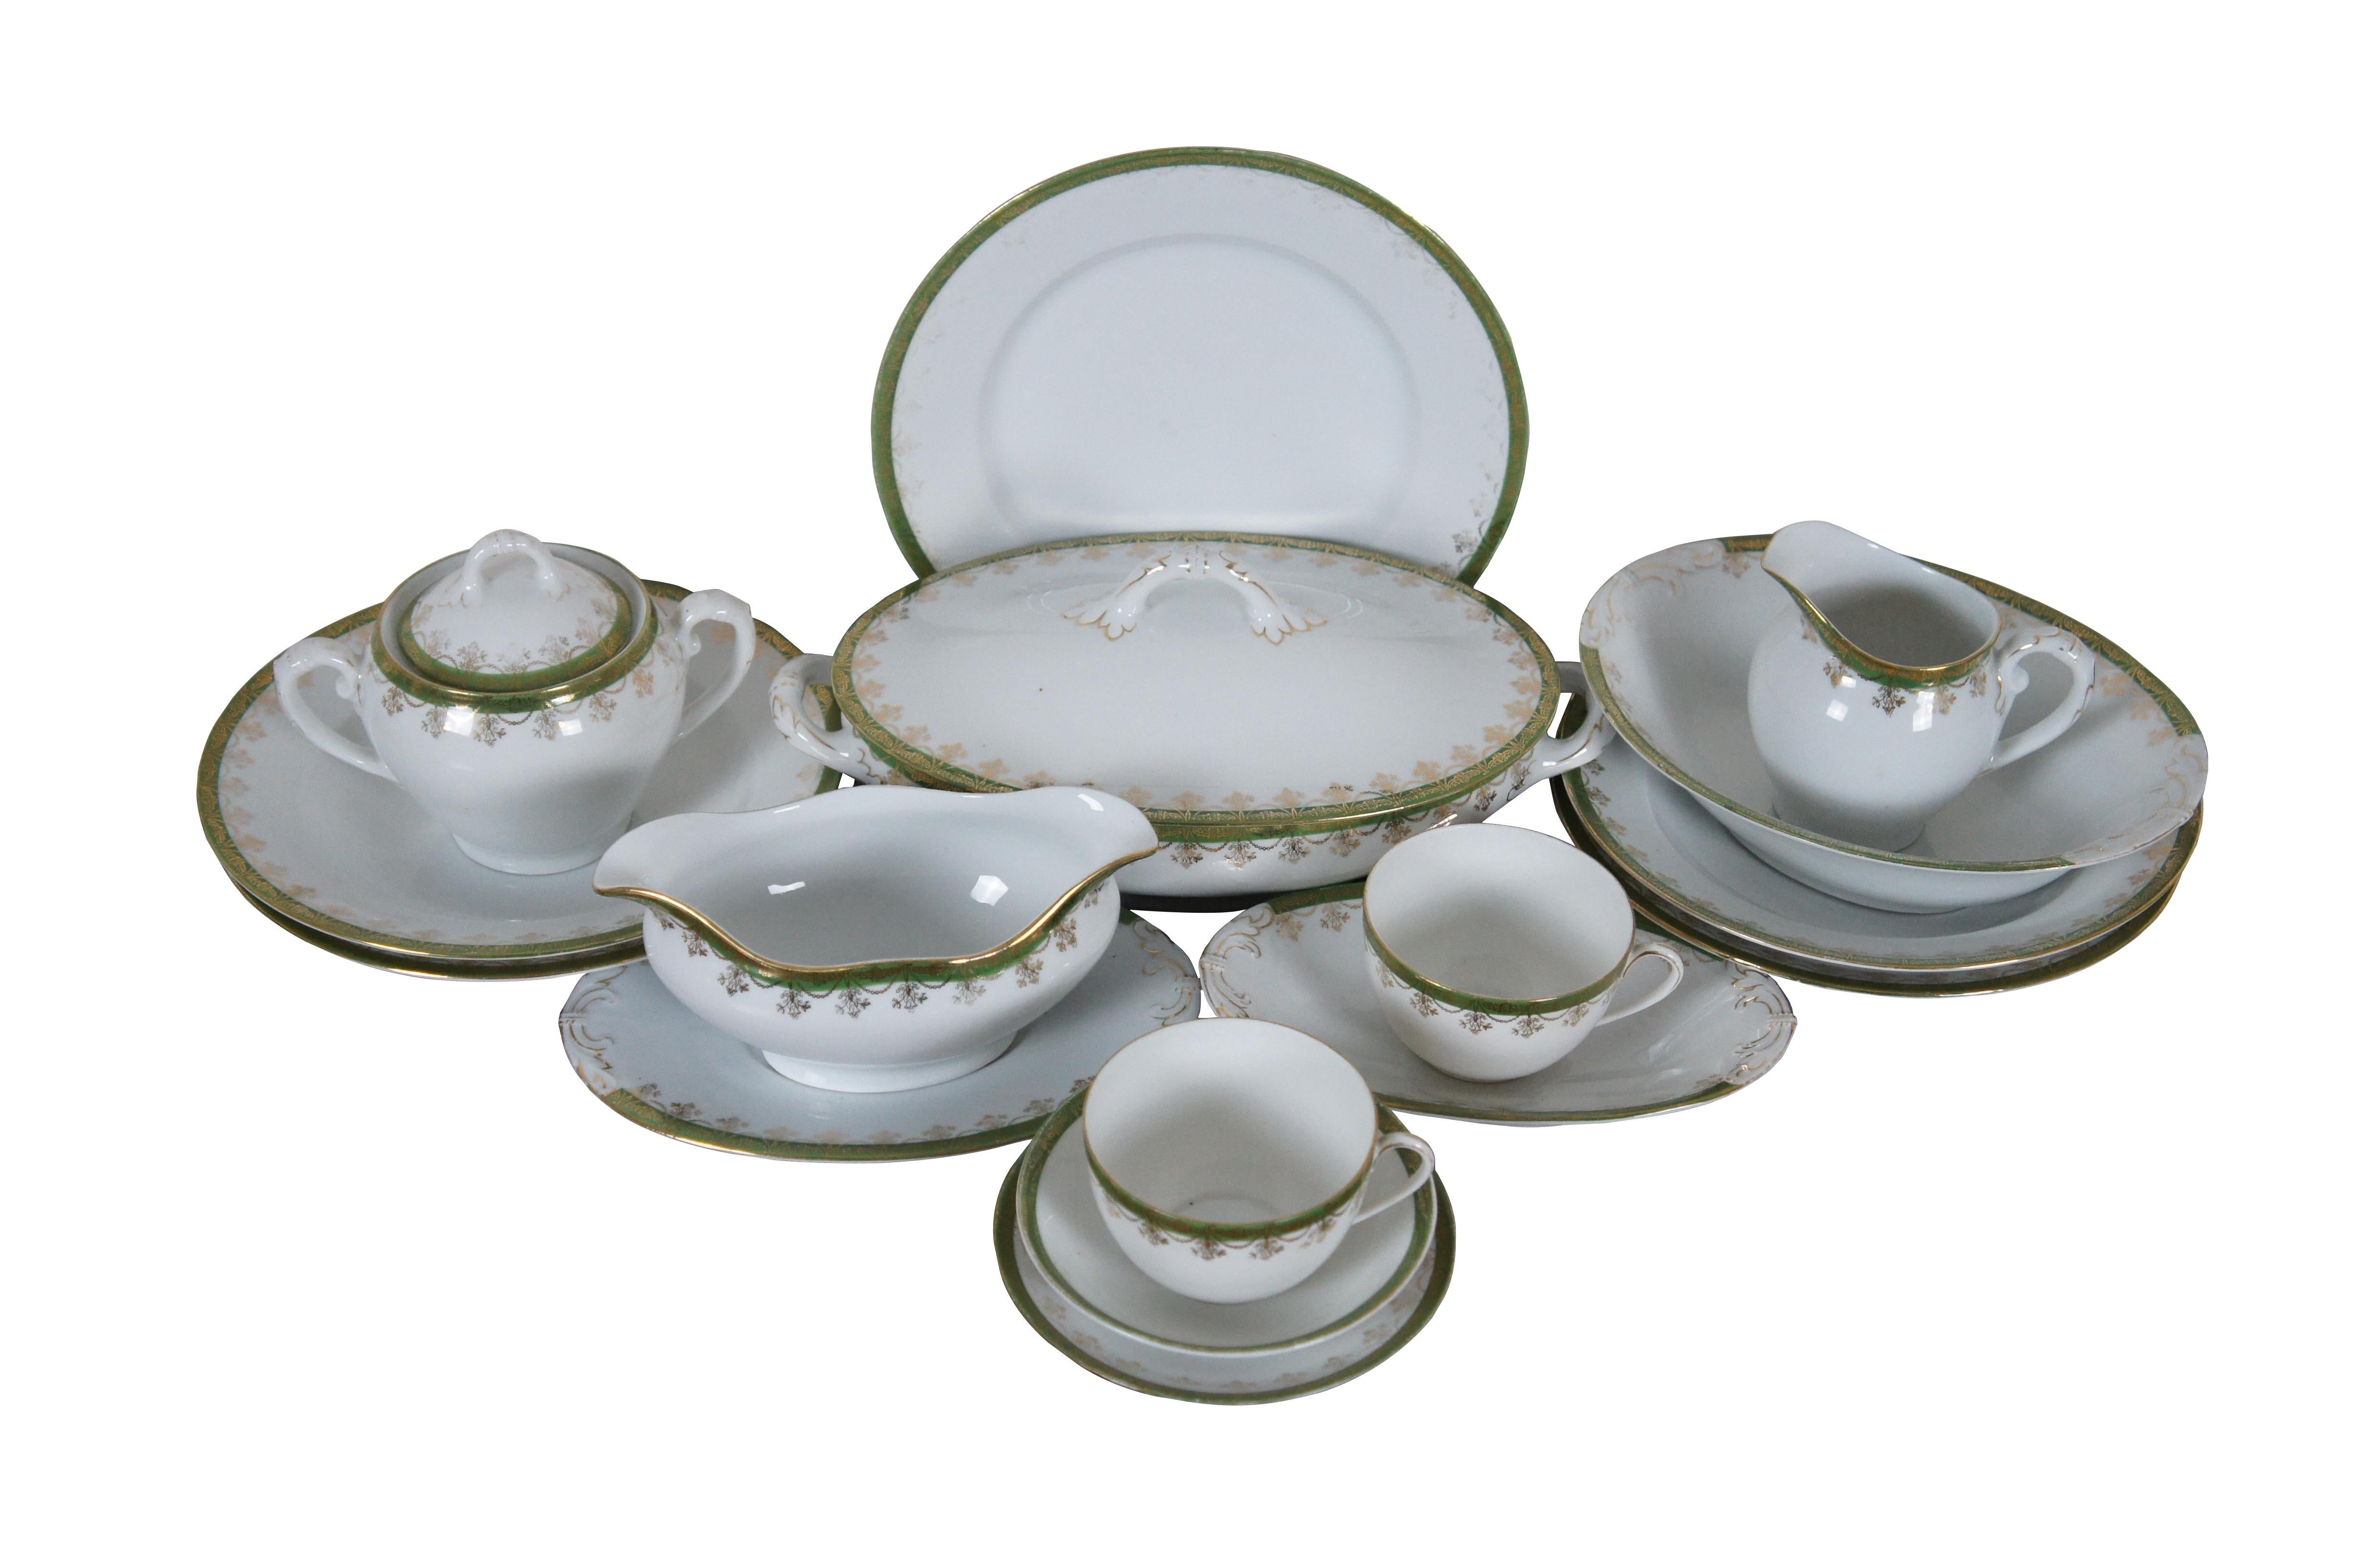 A rare antique pattern 18 piece assorted lot of porcelain dinnerware by Adolf Persch, circa 1902-1910. Features apple green border with gilded trim of Neoclassical beaded, floral swags.  Includes plates, bowls, cups, saucers, gravy boat, cream,